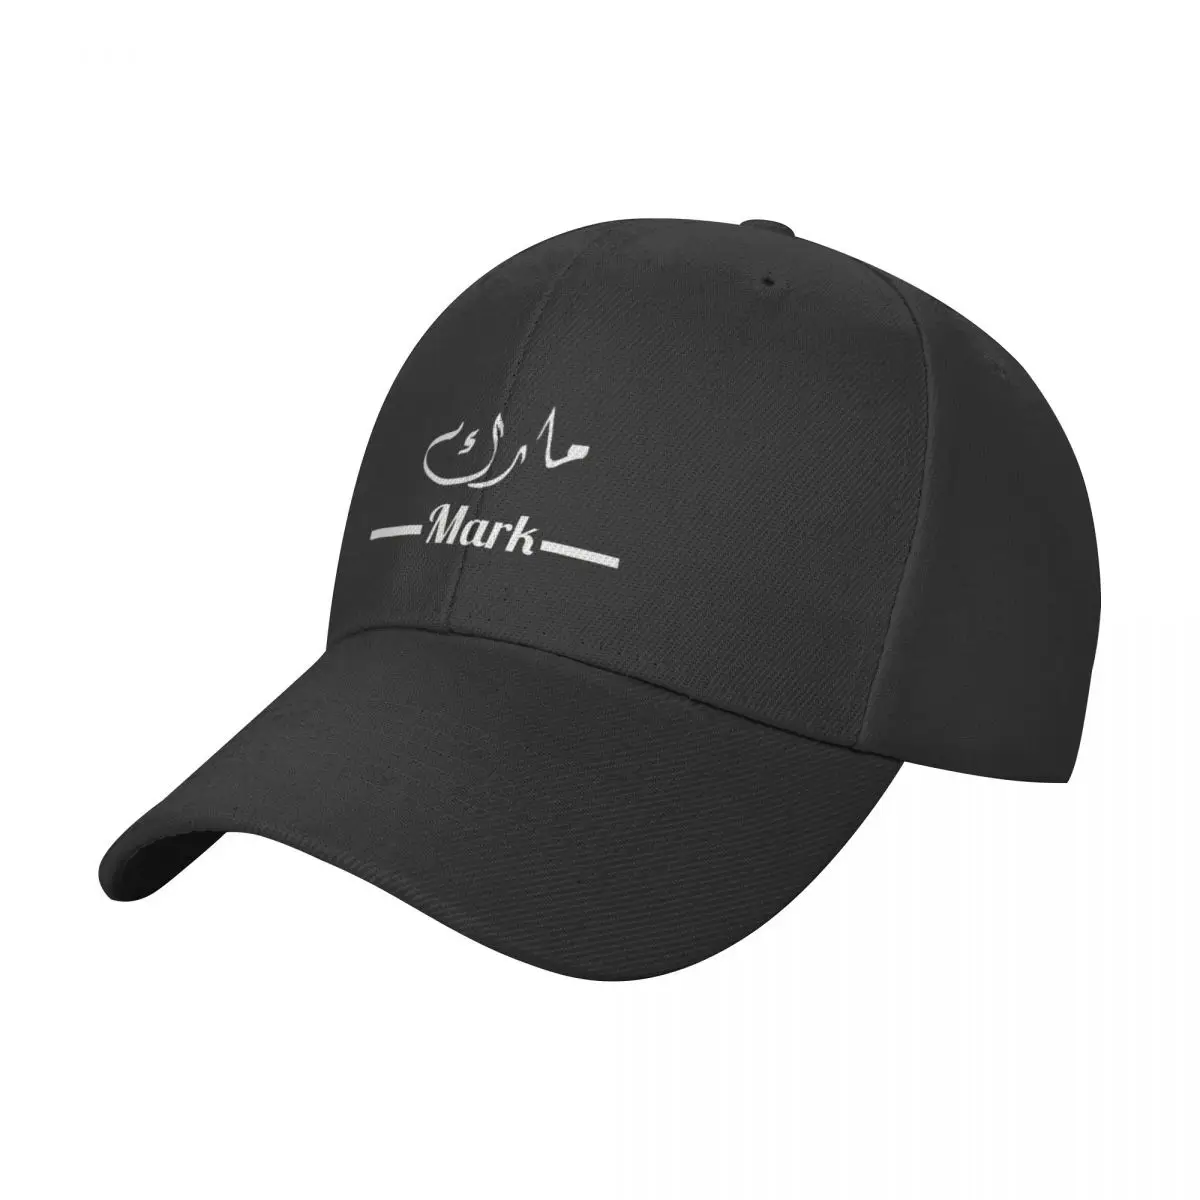 

Mark  My Name in Arabic - Names in English & Hand-crafted Arabic Calligraphy Baseball Cap hard hat For Men Women's